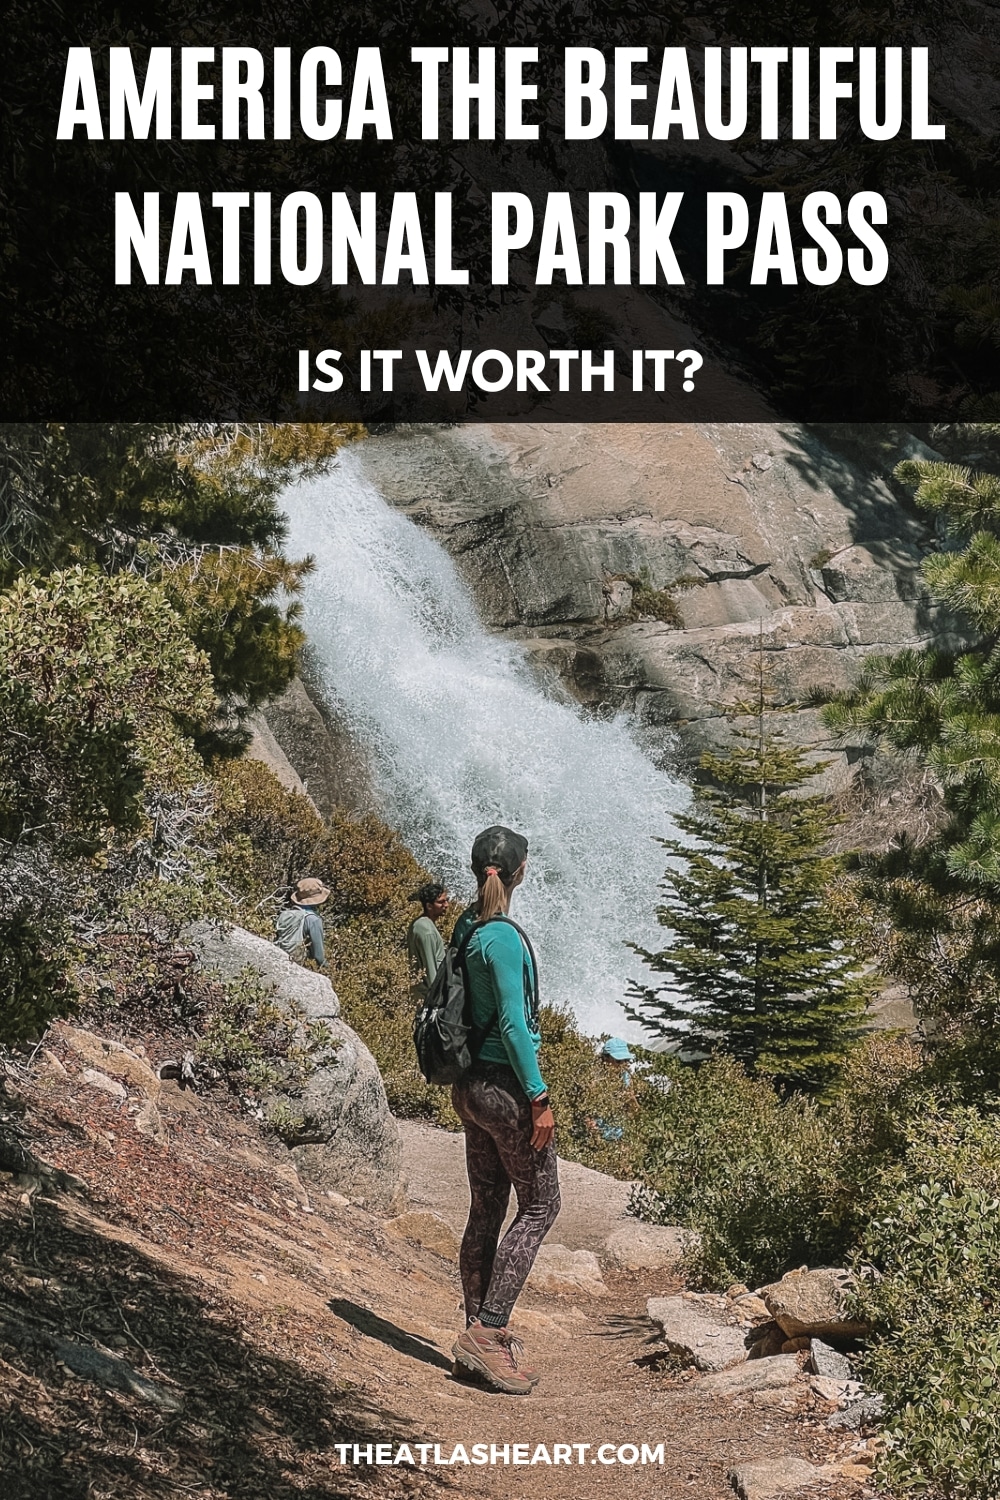 America the Beautiful National Park Pass: Is it Actually Worth it?